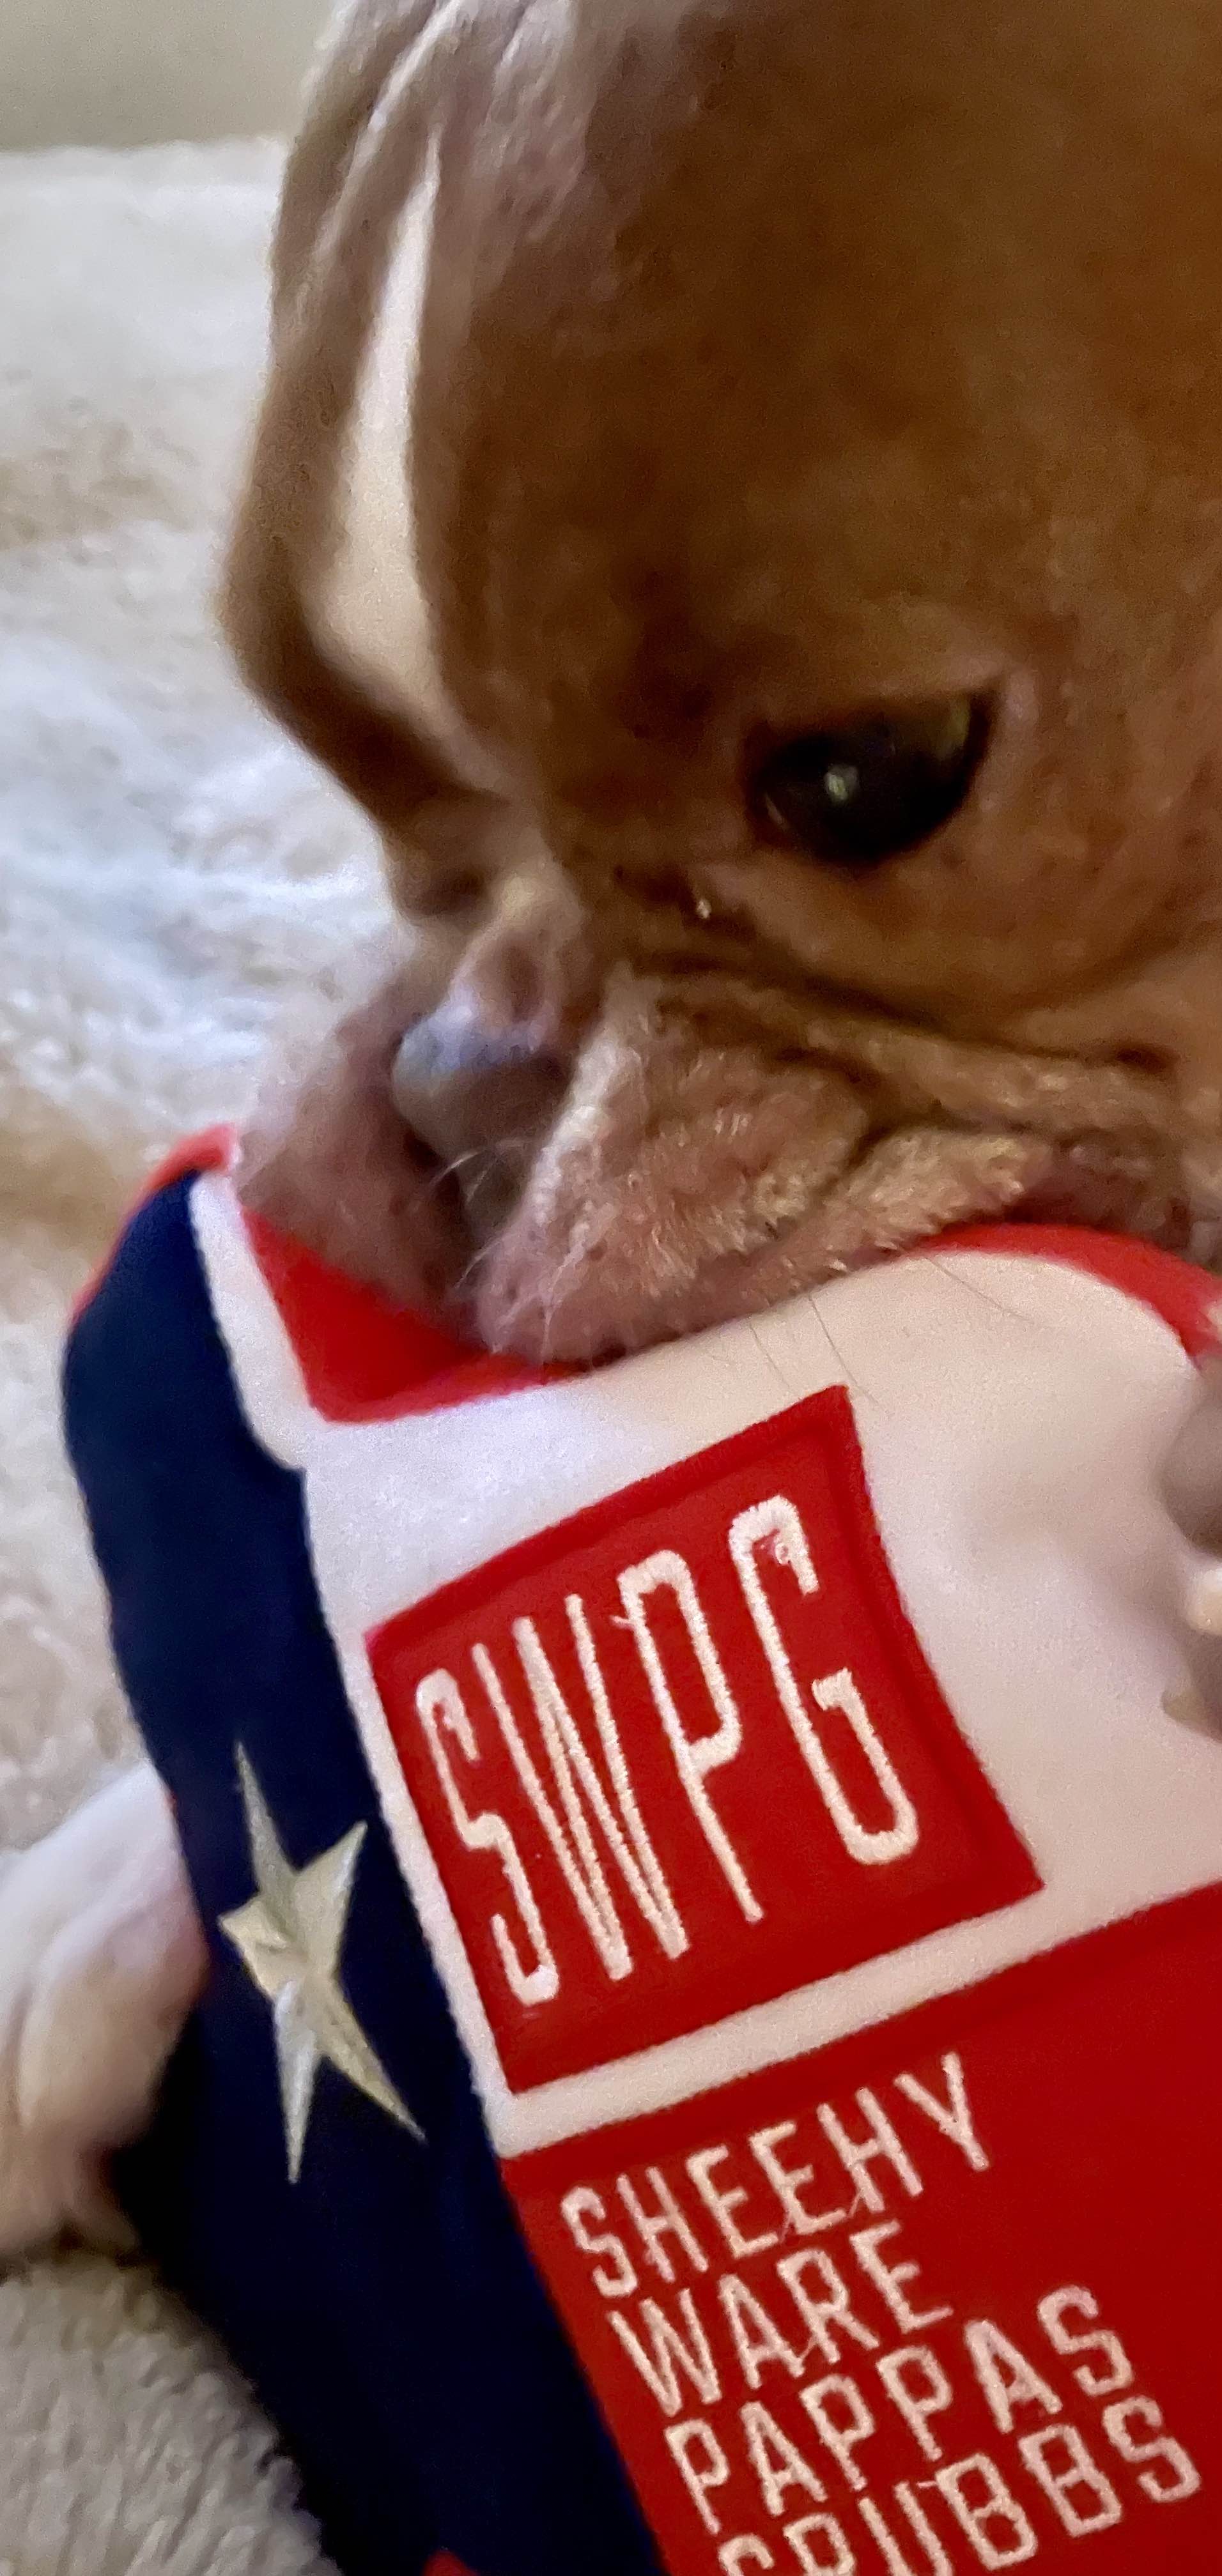 Our furry friend loves some SWPG!